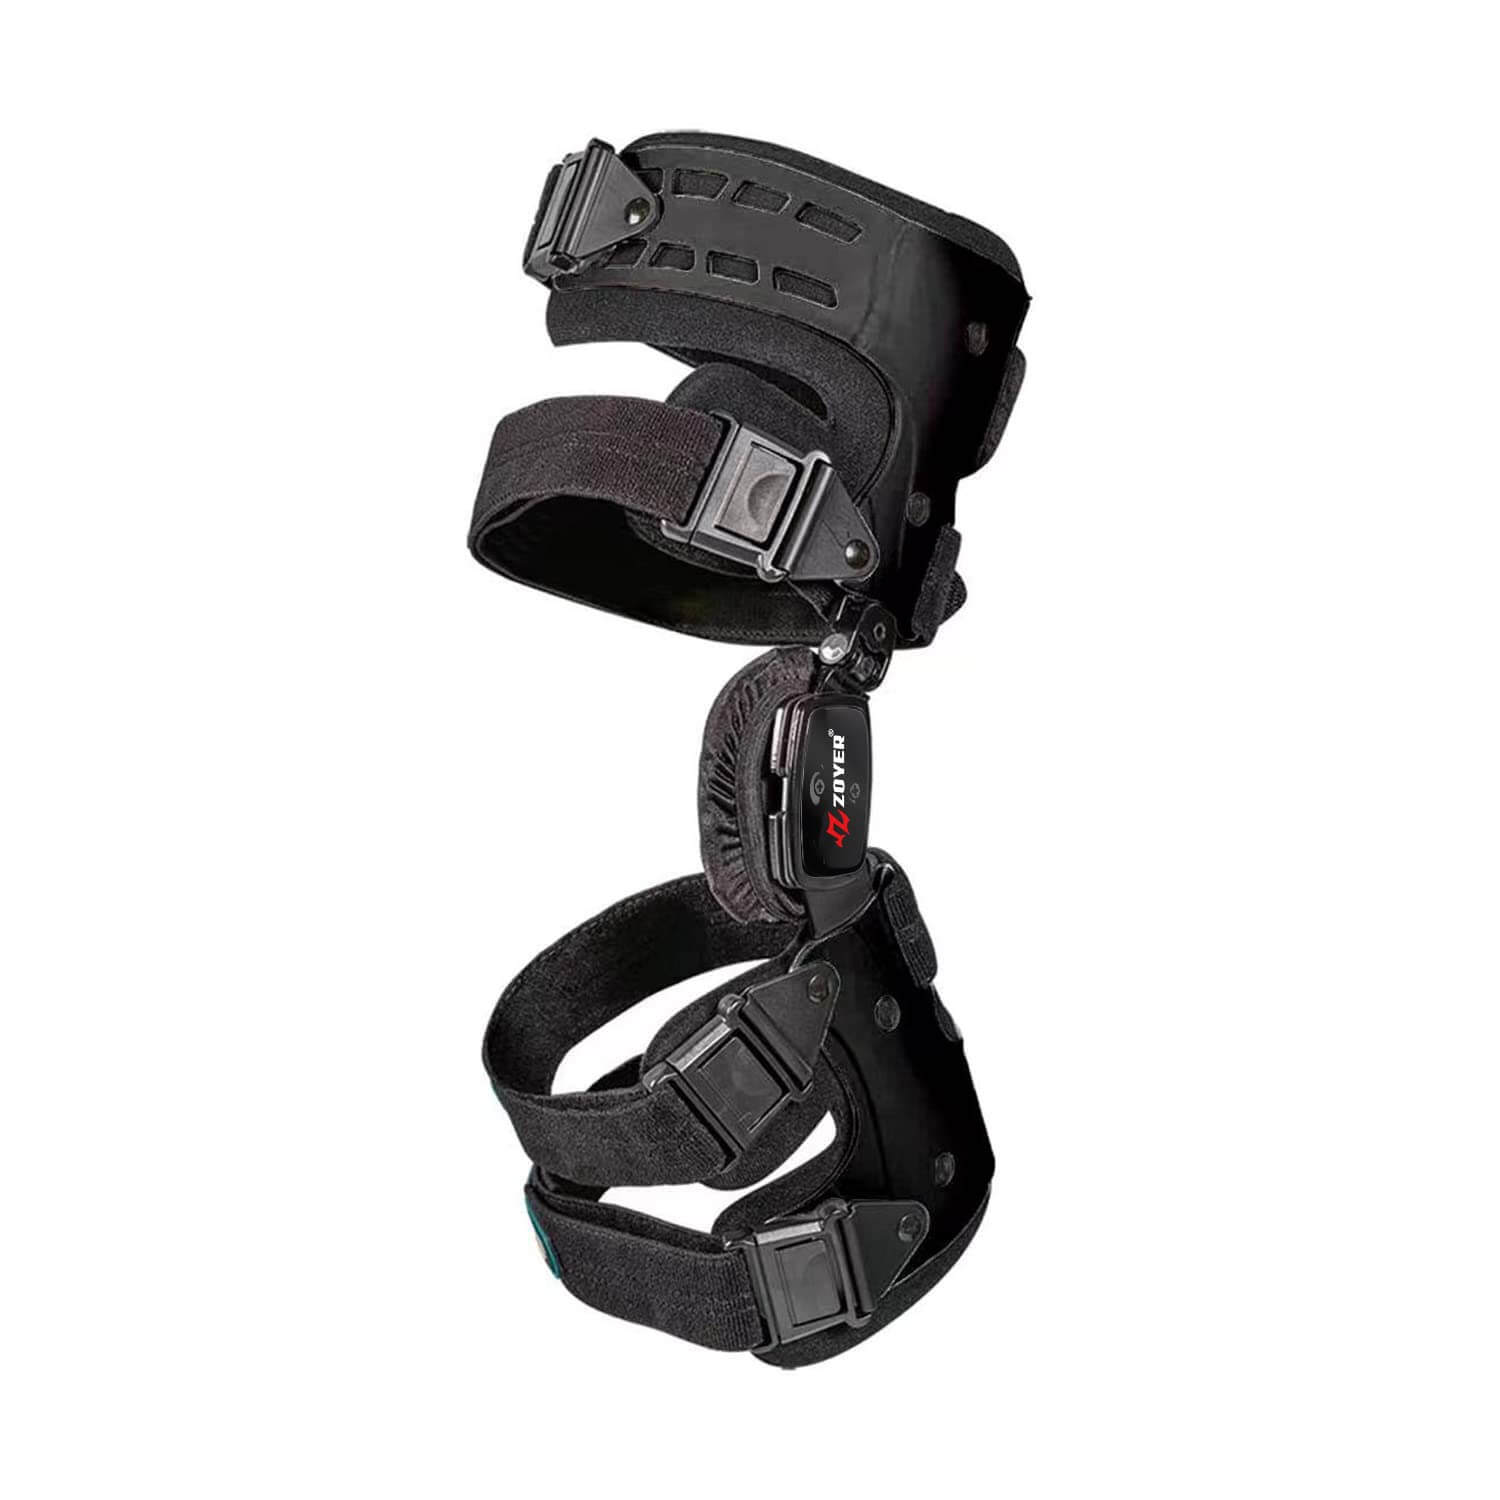 the Premium Ascender Knee Brace, an advanced knee support system tailored for active individuals